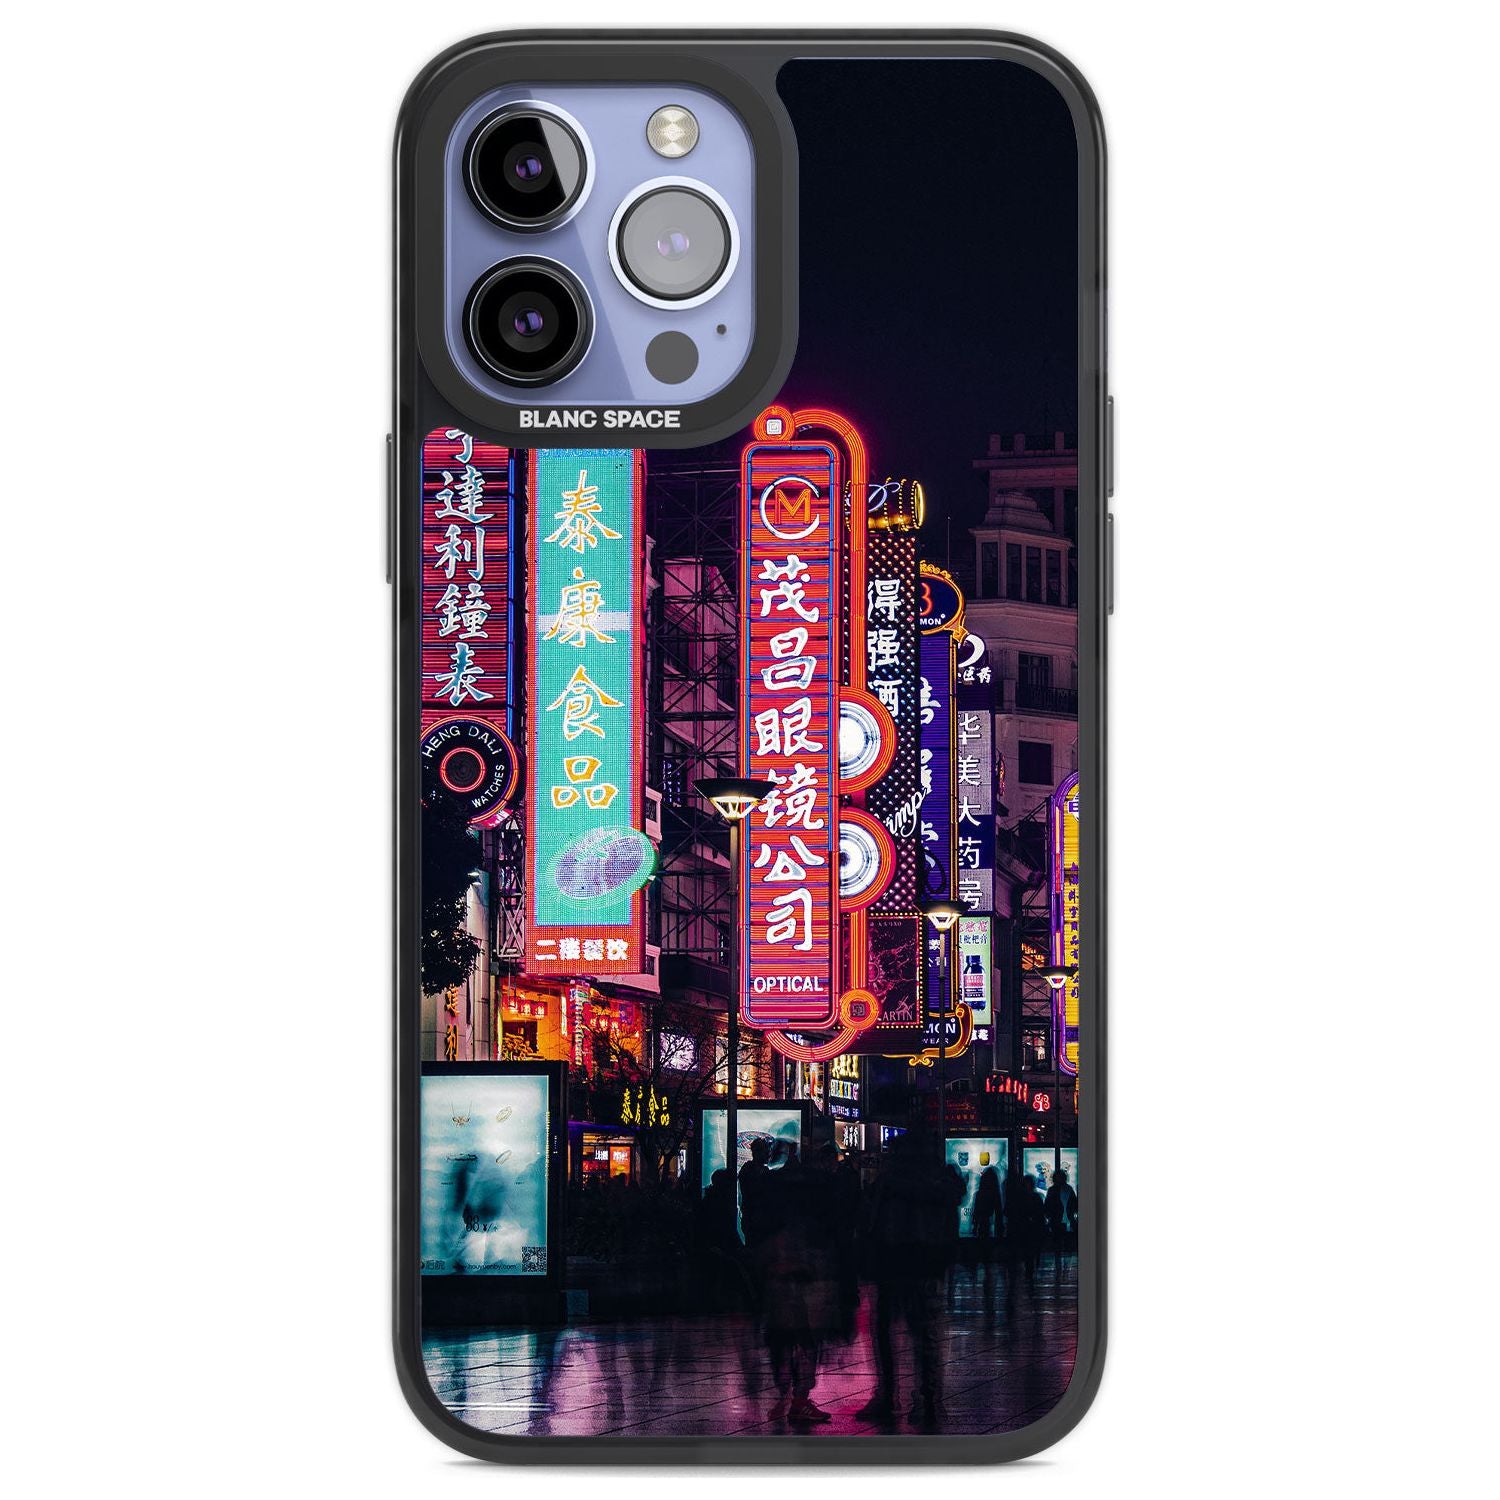 Busy Street - Neon Cities Photographs Phone Case iPhone 13 Pro Max / Black Impact Case,iPhone 14 Pro Max / Black Impact Case Blanc Space